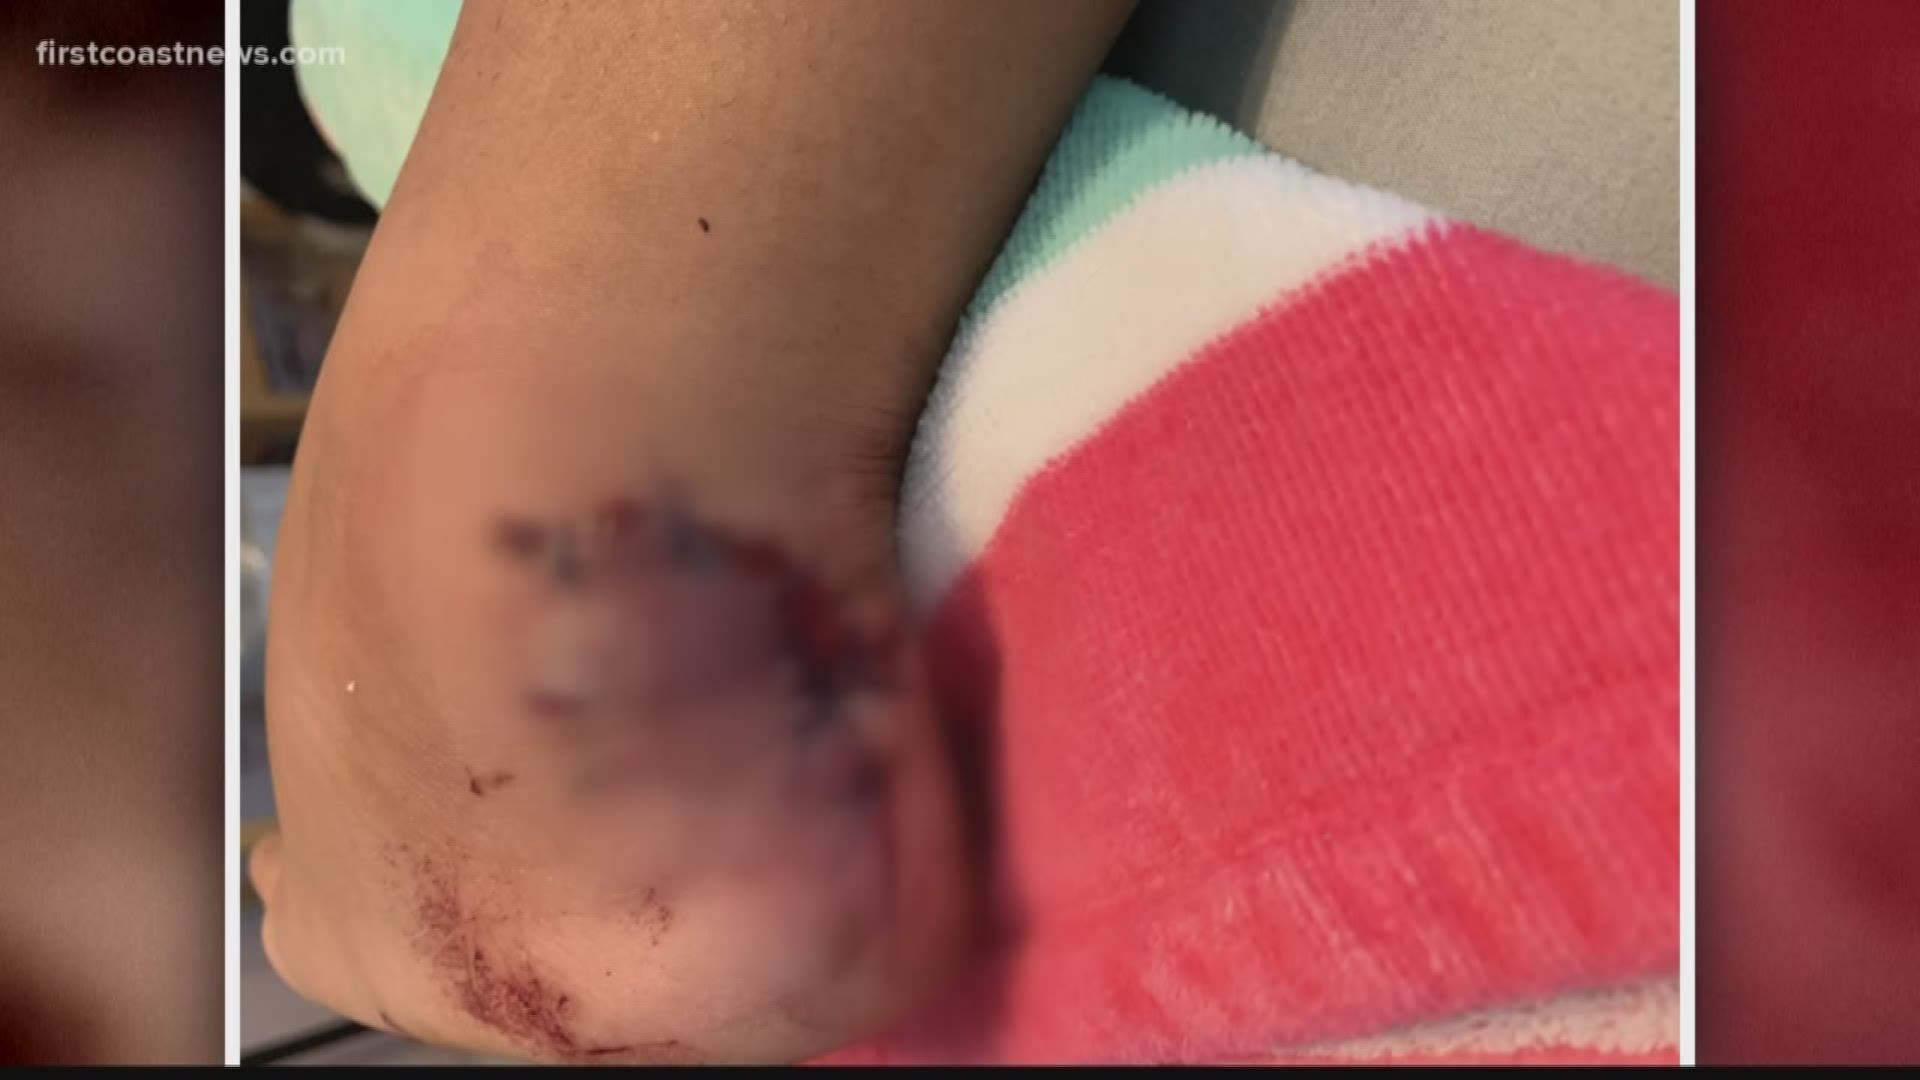 Around 7:30 a.m., the shark reportedly bit the teen while she was swimming near the Omni Amelia Island Plantation Resort.